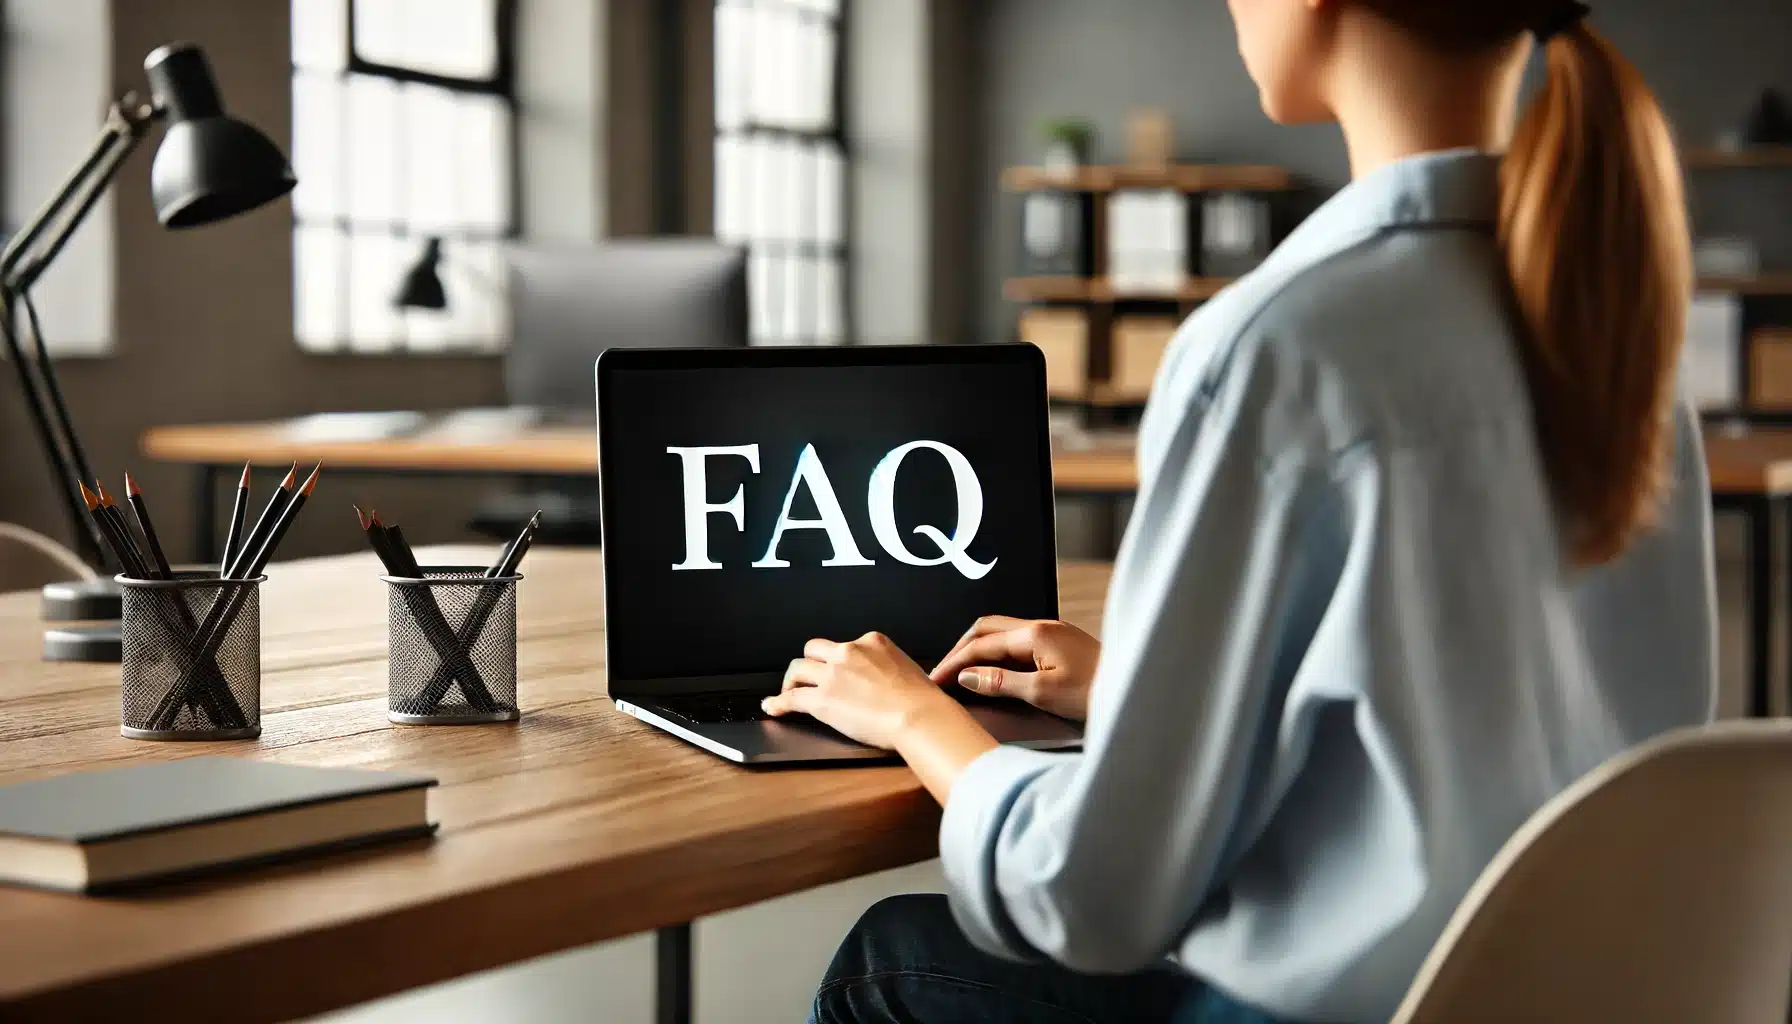 A woman sitting in a modern office in front of a laptop displaying the word 'FAQ' on the screen in bold typography. The desk is organized with some office supplies visible.